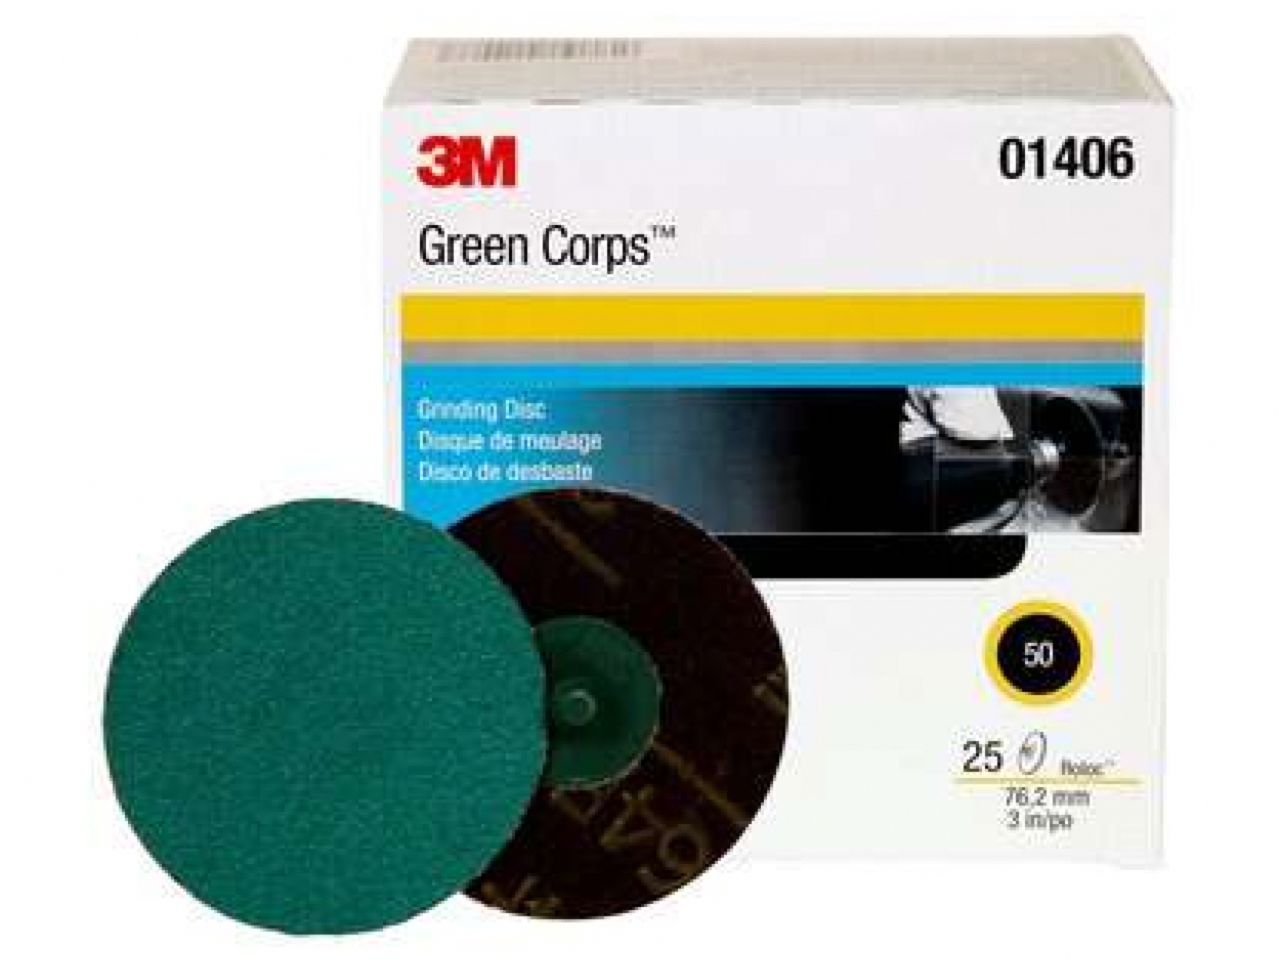 3M Green CorpsT RolocT Disc